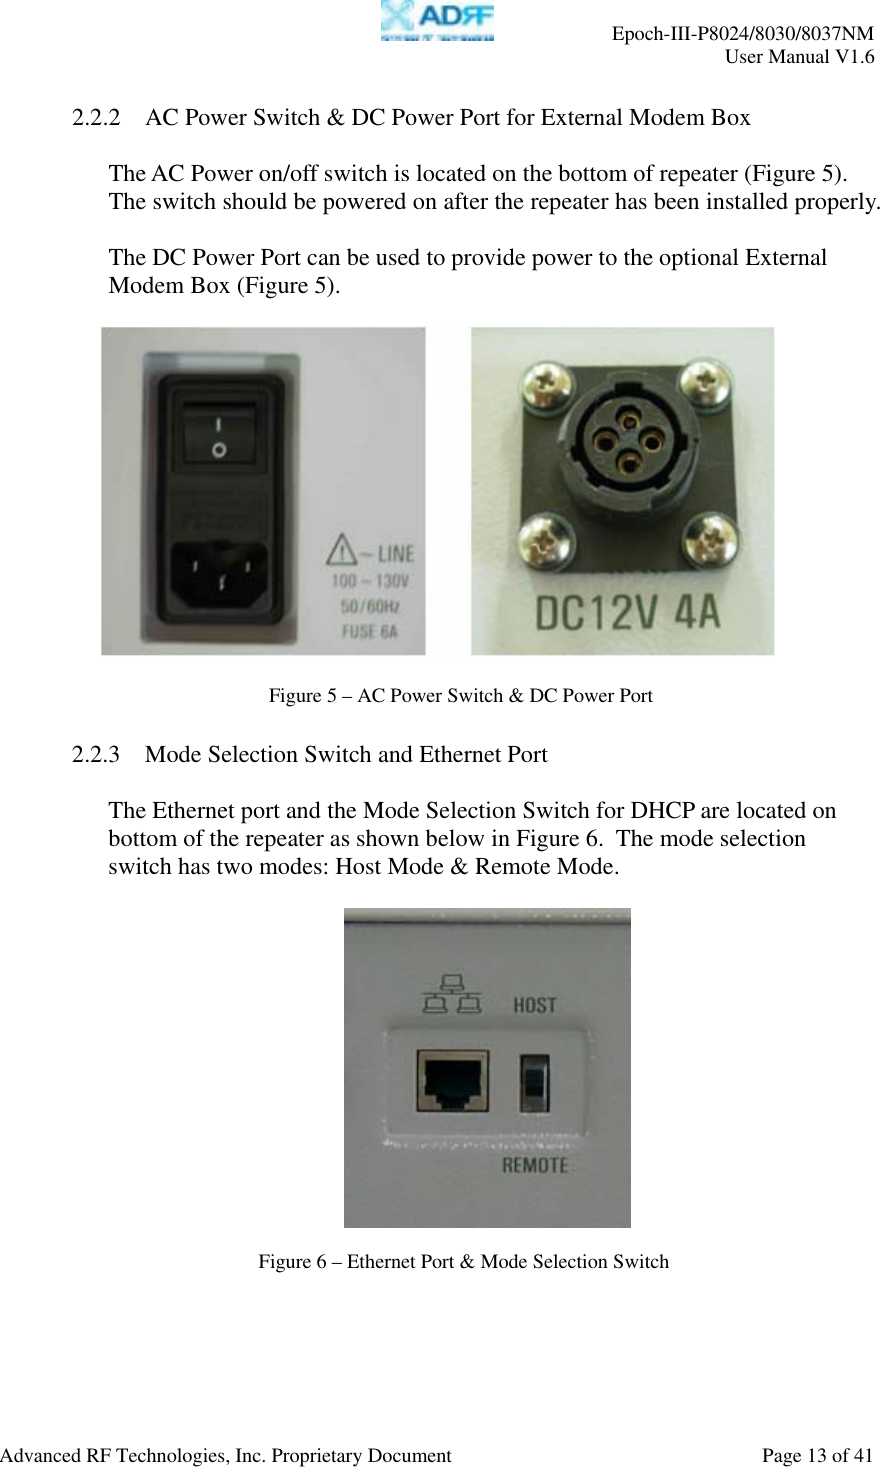     Epoch-III-P8024/8030/8037NM  User Manual V1.6  Advanced RF Technologies, Inc. Proprietary Document  Page 13 of 41  2.2.2 AC Power Switch &amp; DC Power Port for External Modem Box  The AC Power on/off switch is located on the bottom of repeater (Figure 5).  The switch should be powered on after the repeater has been installed properly.  The DC Power Port can be used to provide power to the optional External Modem Box (Figure 5).      2.2.3 Mode Selection Switch and Ethernet Port  The Ethernet port and the Mode Selection Switch for DHCP are located on bottom of the repeater as shown below in Figure 6.  The mode selection switch has two modes: Host Mode &amp; Remote Mode.      Figure 5–AC Power Switch &amp; DC Power PortFigure 6 – Ethernet Port &amp; Mode Selection Switch 